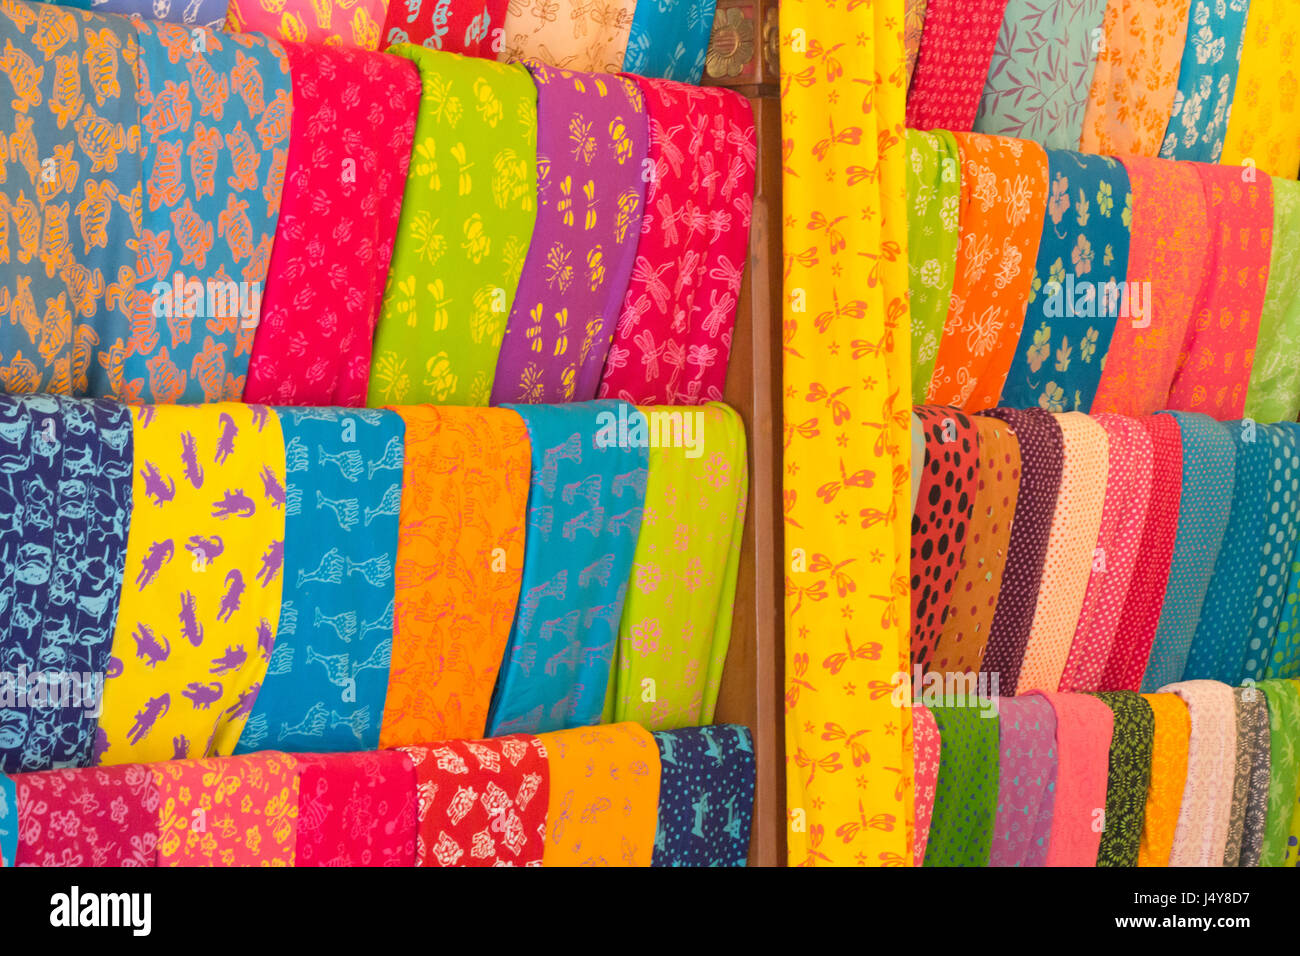 Bolts of colourful cloth hanging in a shop in Denpasar, Bali, Indonesia Stock Photo